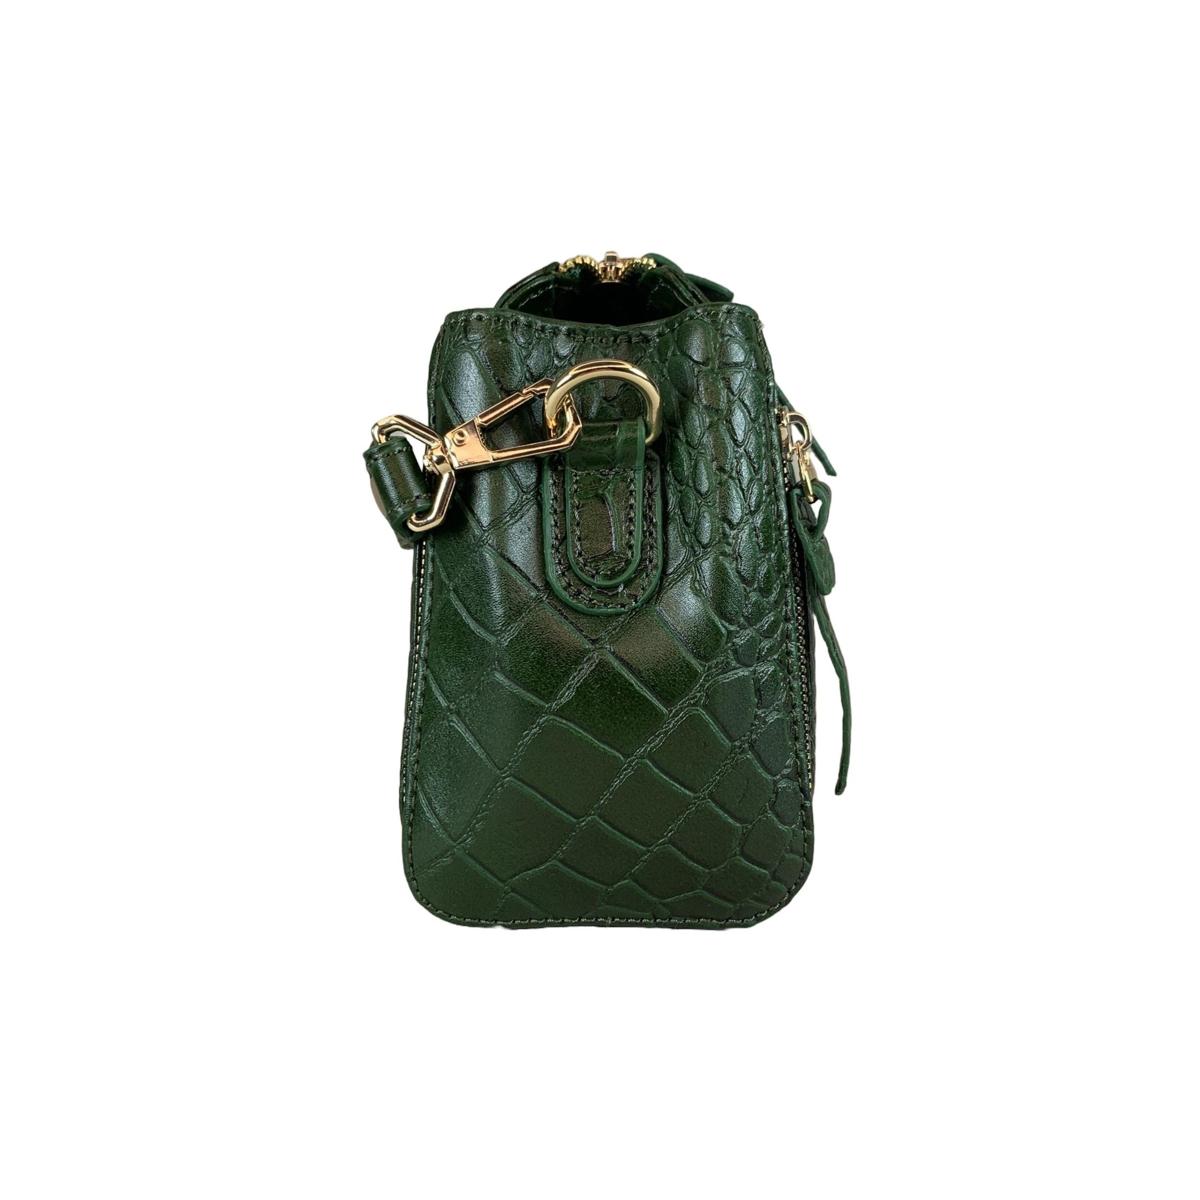 LeatherLuxe - Green Leather Handbag Shoulder Bag for Women; Crocodile Style Genuine leather Designer Premium leather bag for women leather hobo tote messenger bag Leather Accessories Leather Shop Leather Goods